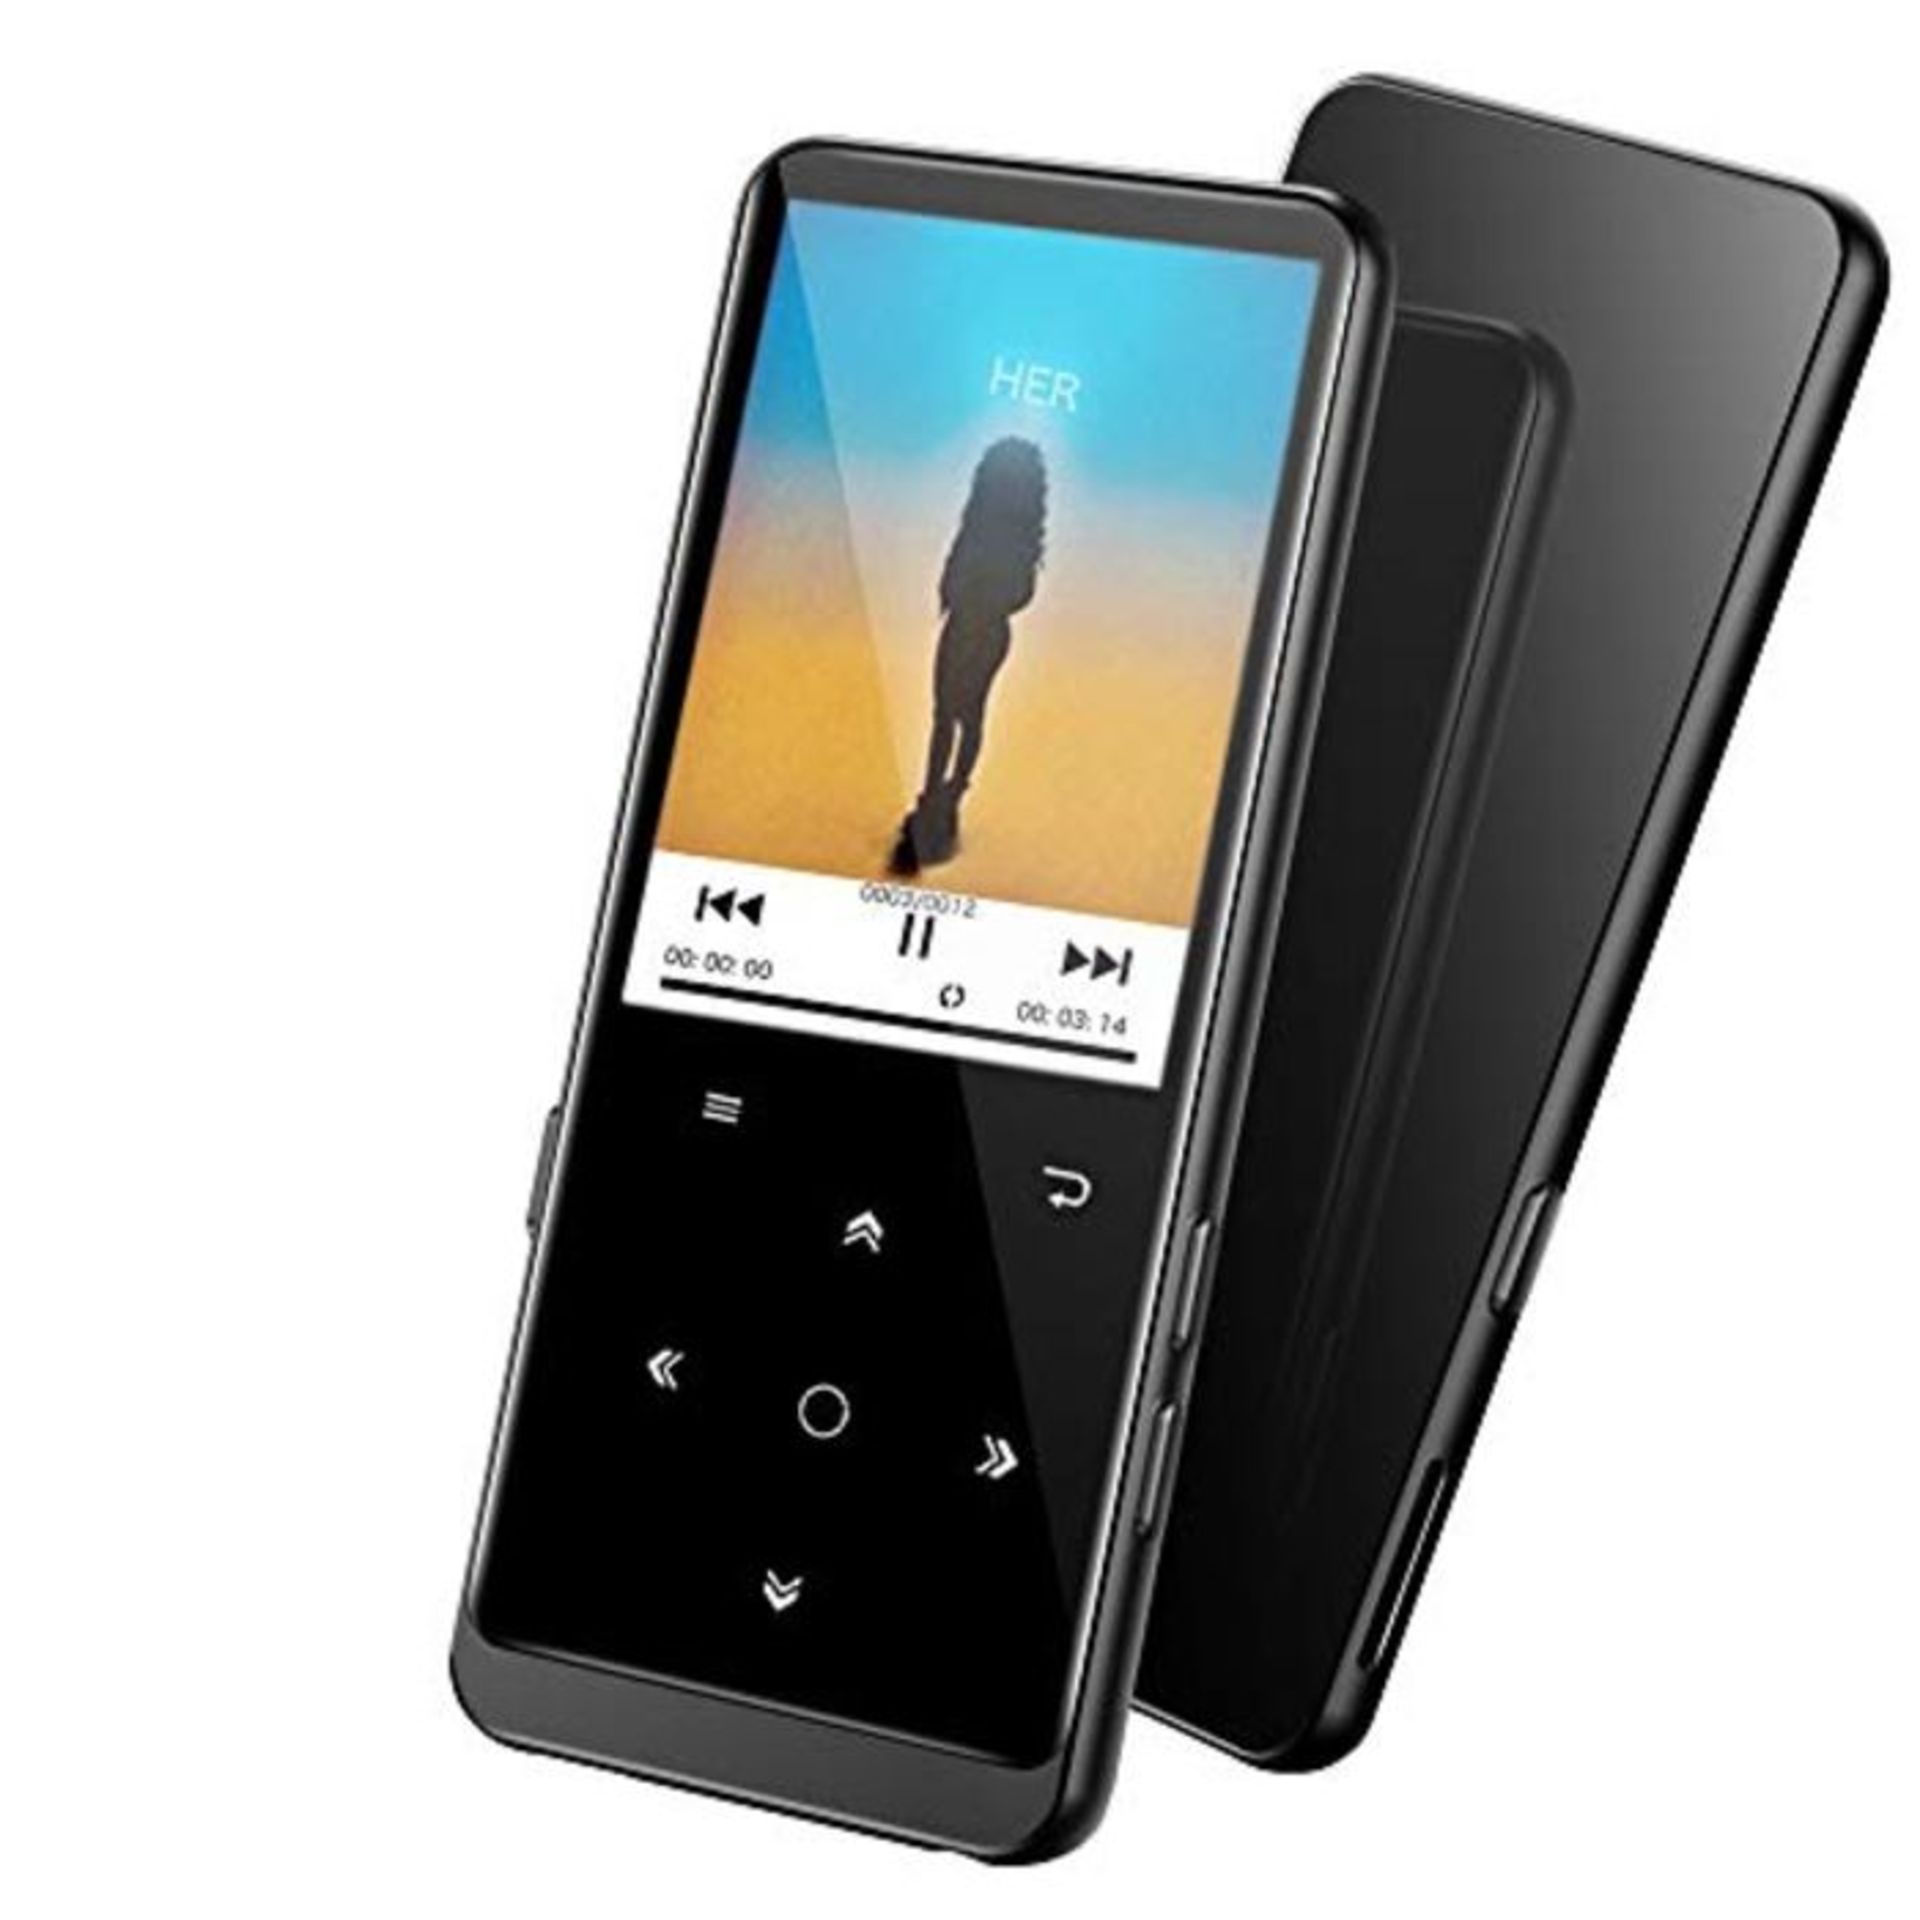 32GB MP3 Player, SUPEREYE MP3 Music Players with Bluetooth 4.2, 2.4" Large Screen, FM